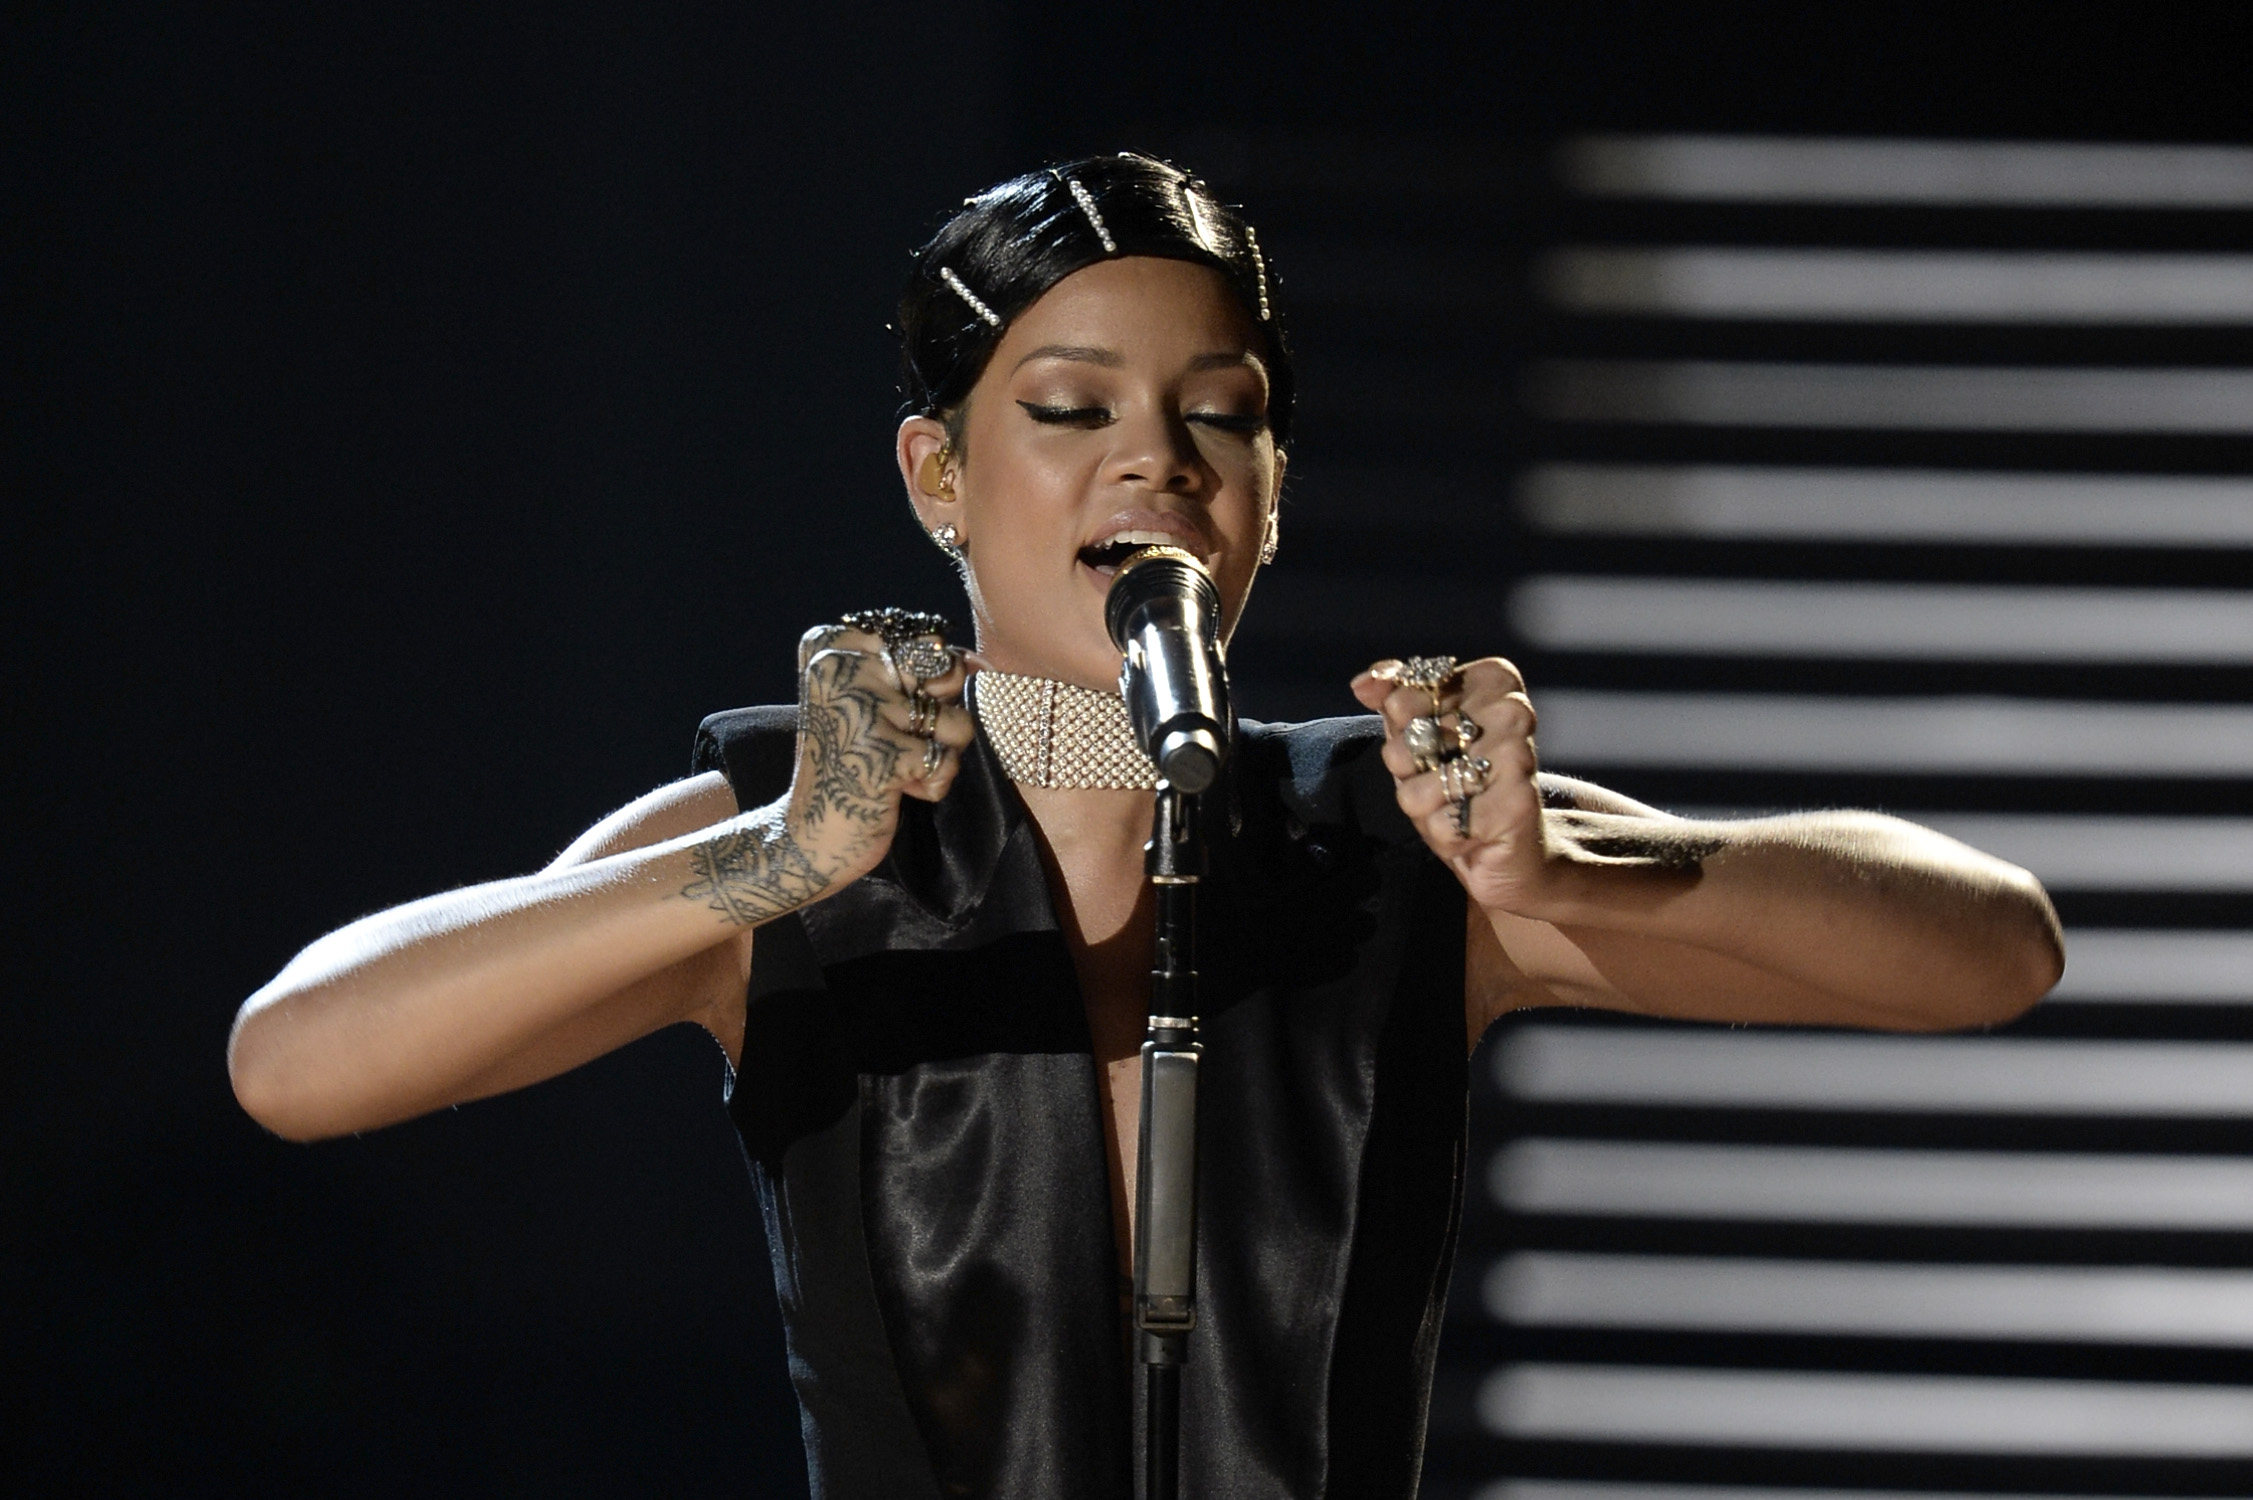 Singer Rihanna performs onstage during the 2013 American Music Awards at Nokia Theatre L.A. Live on November 24, 2013 in Los Angeles, California.  (Photo by Kevin Winter/Getty Images)